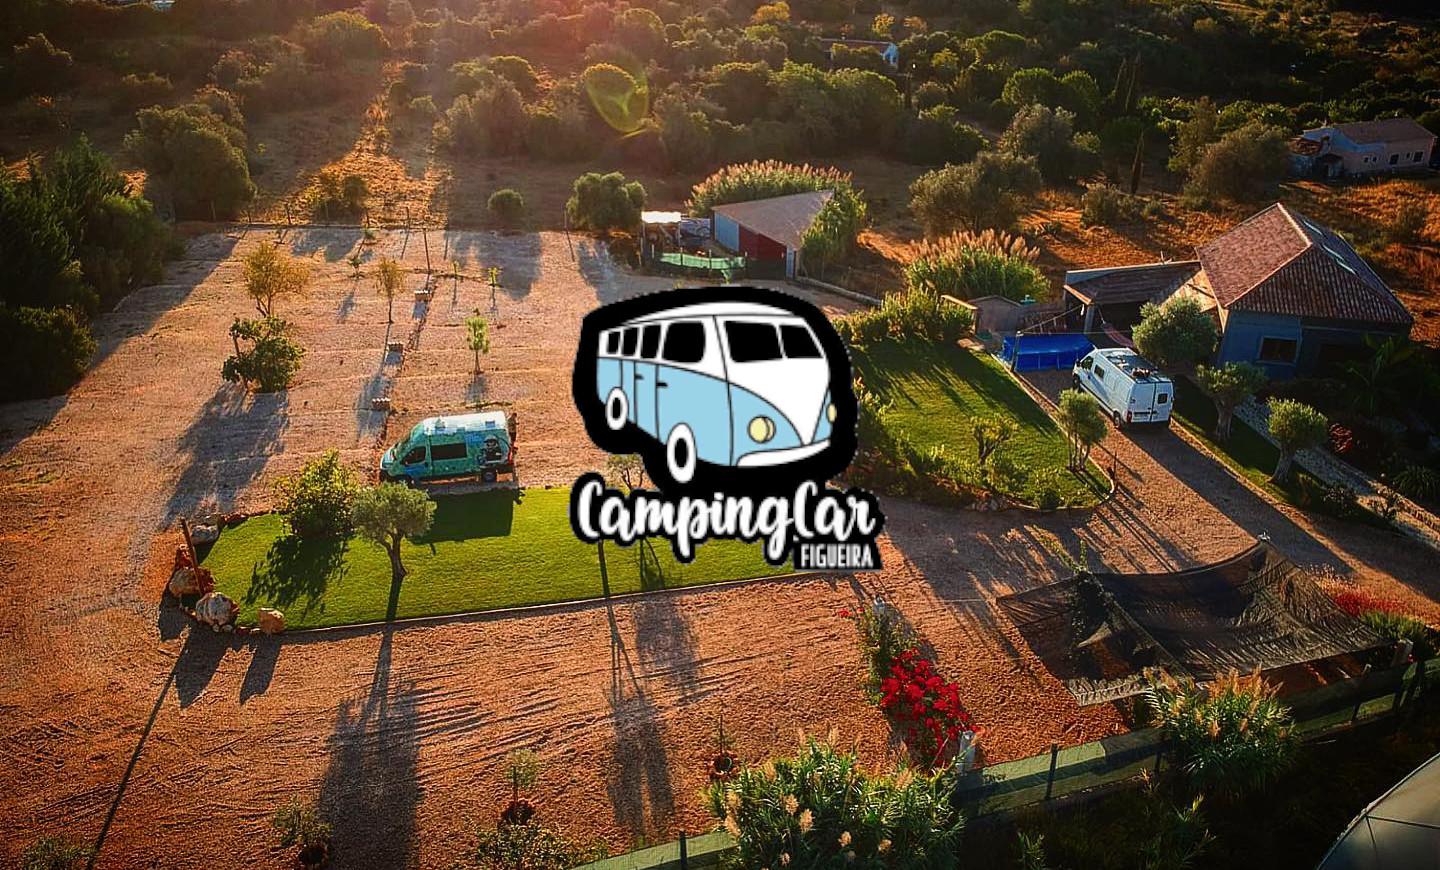 Campingcar Figueira lucht foto